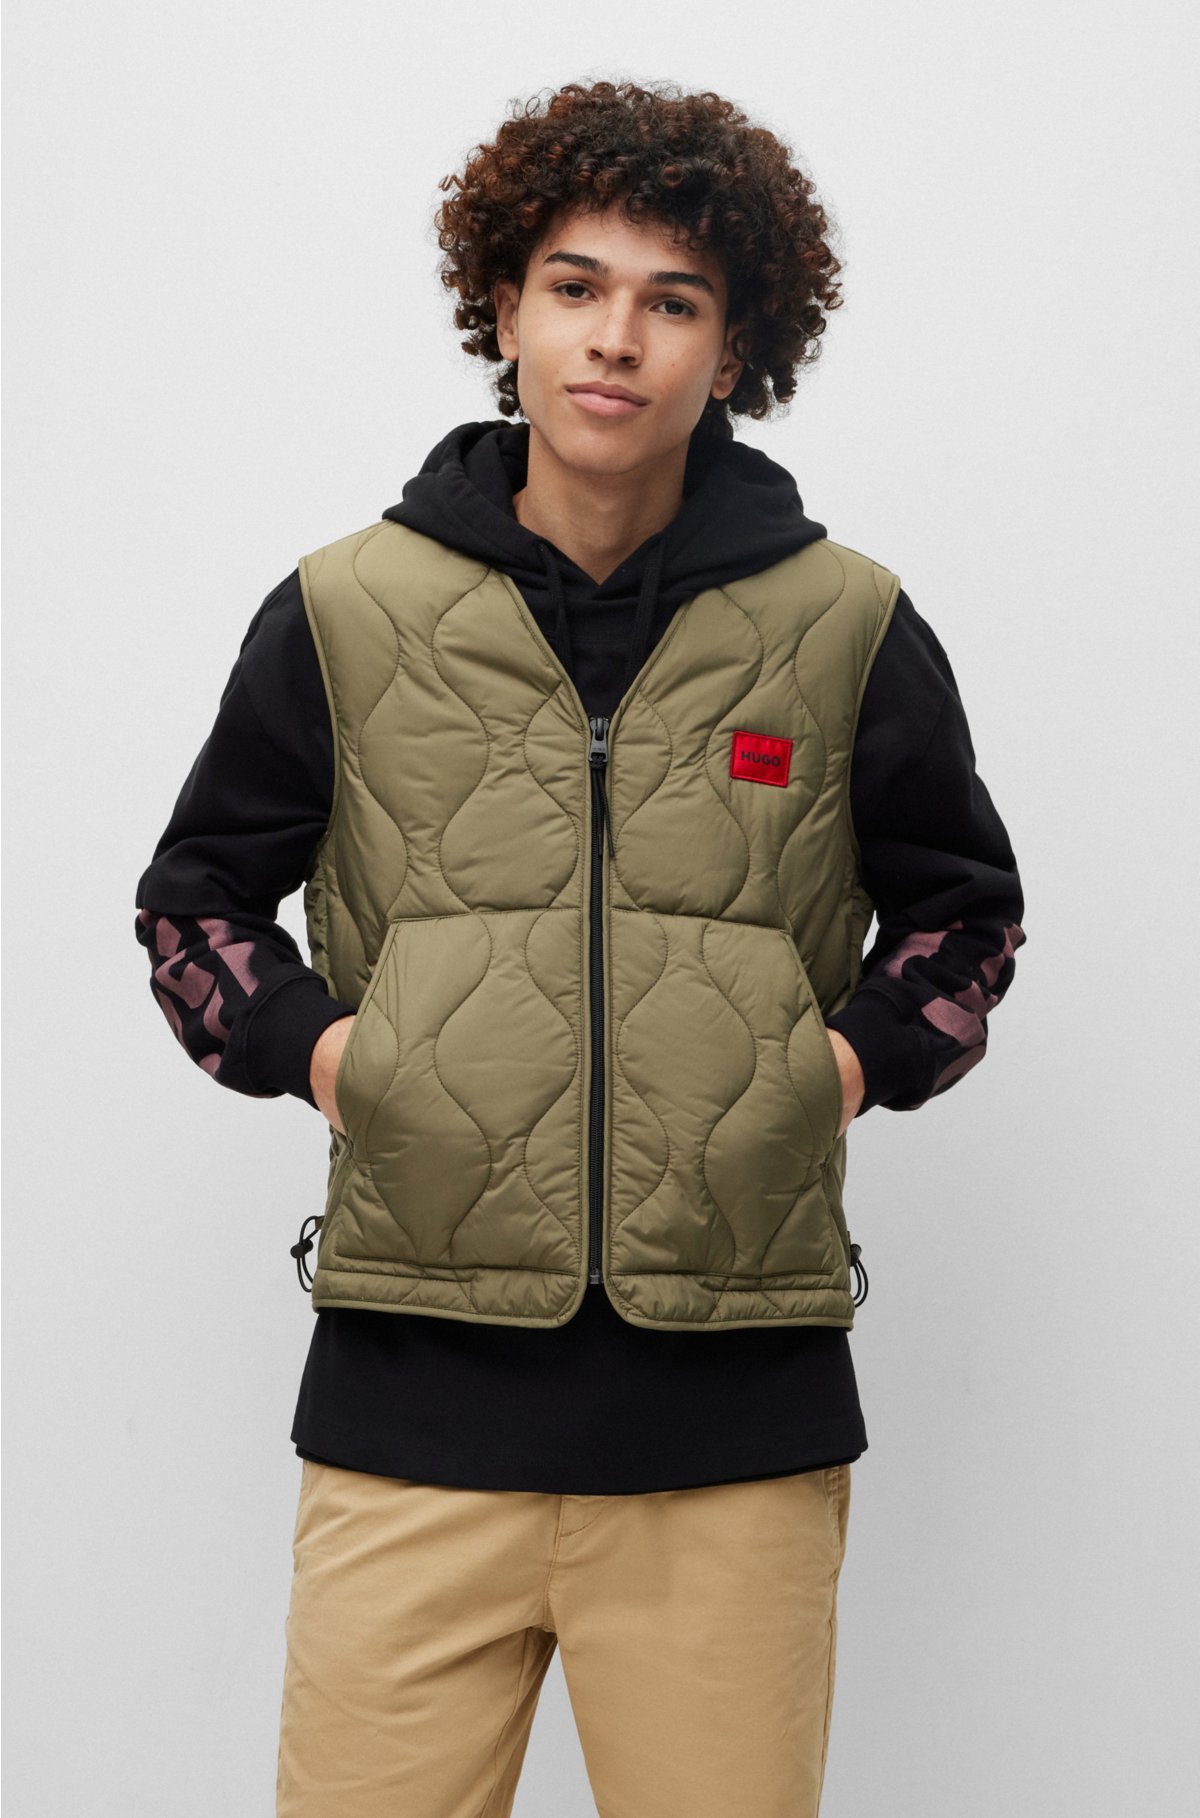 HUGO - Water-repellent logo gilet red with label